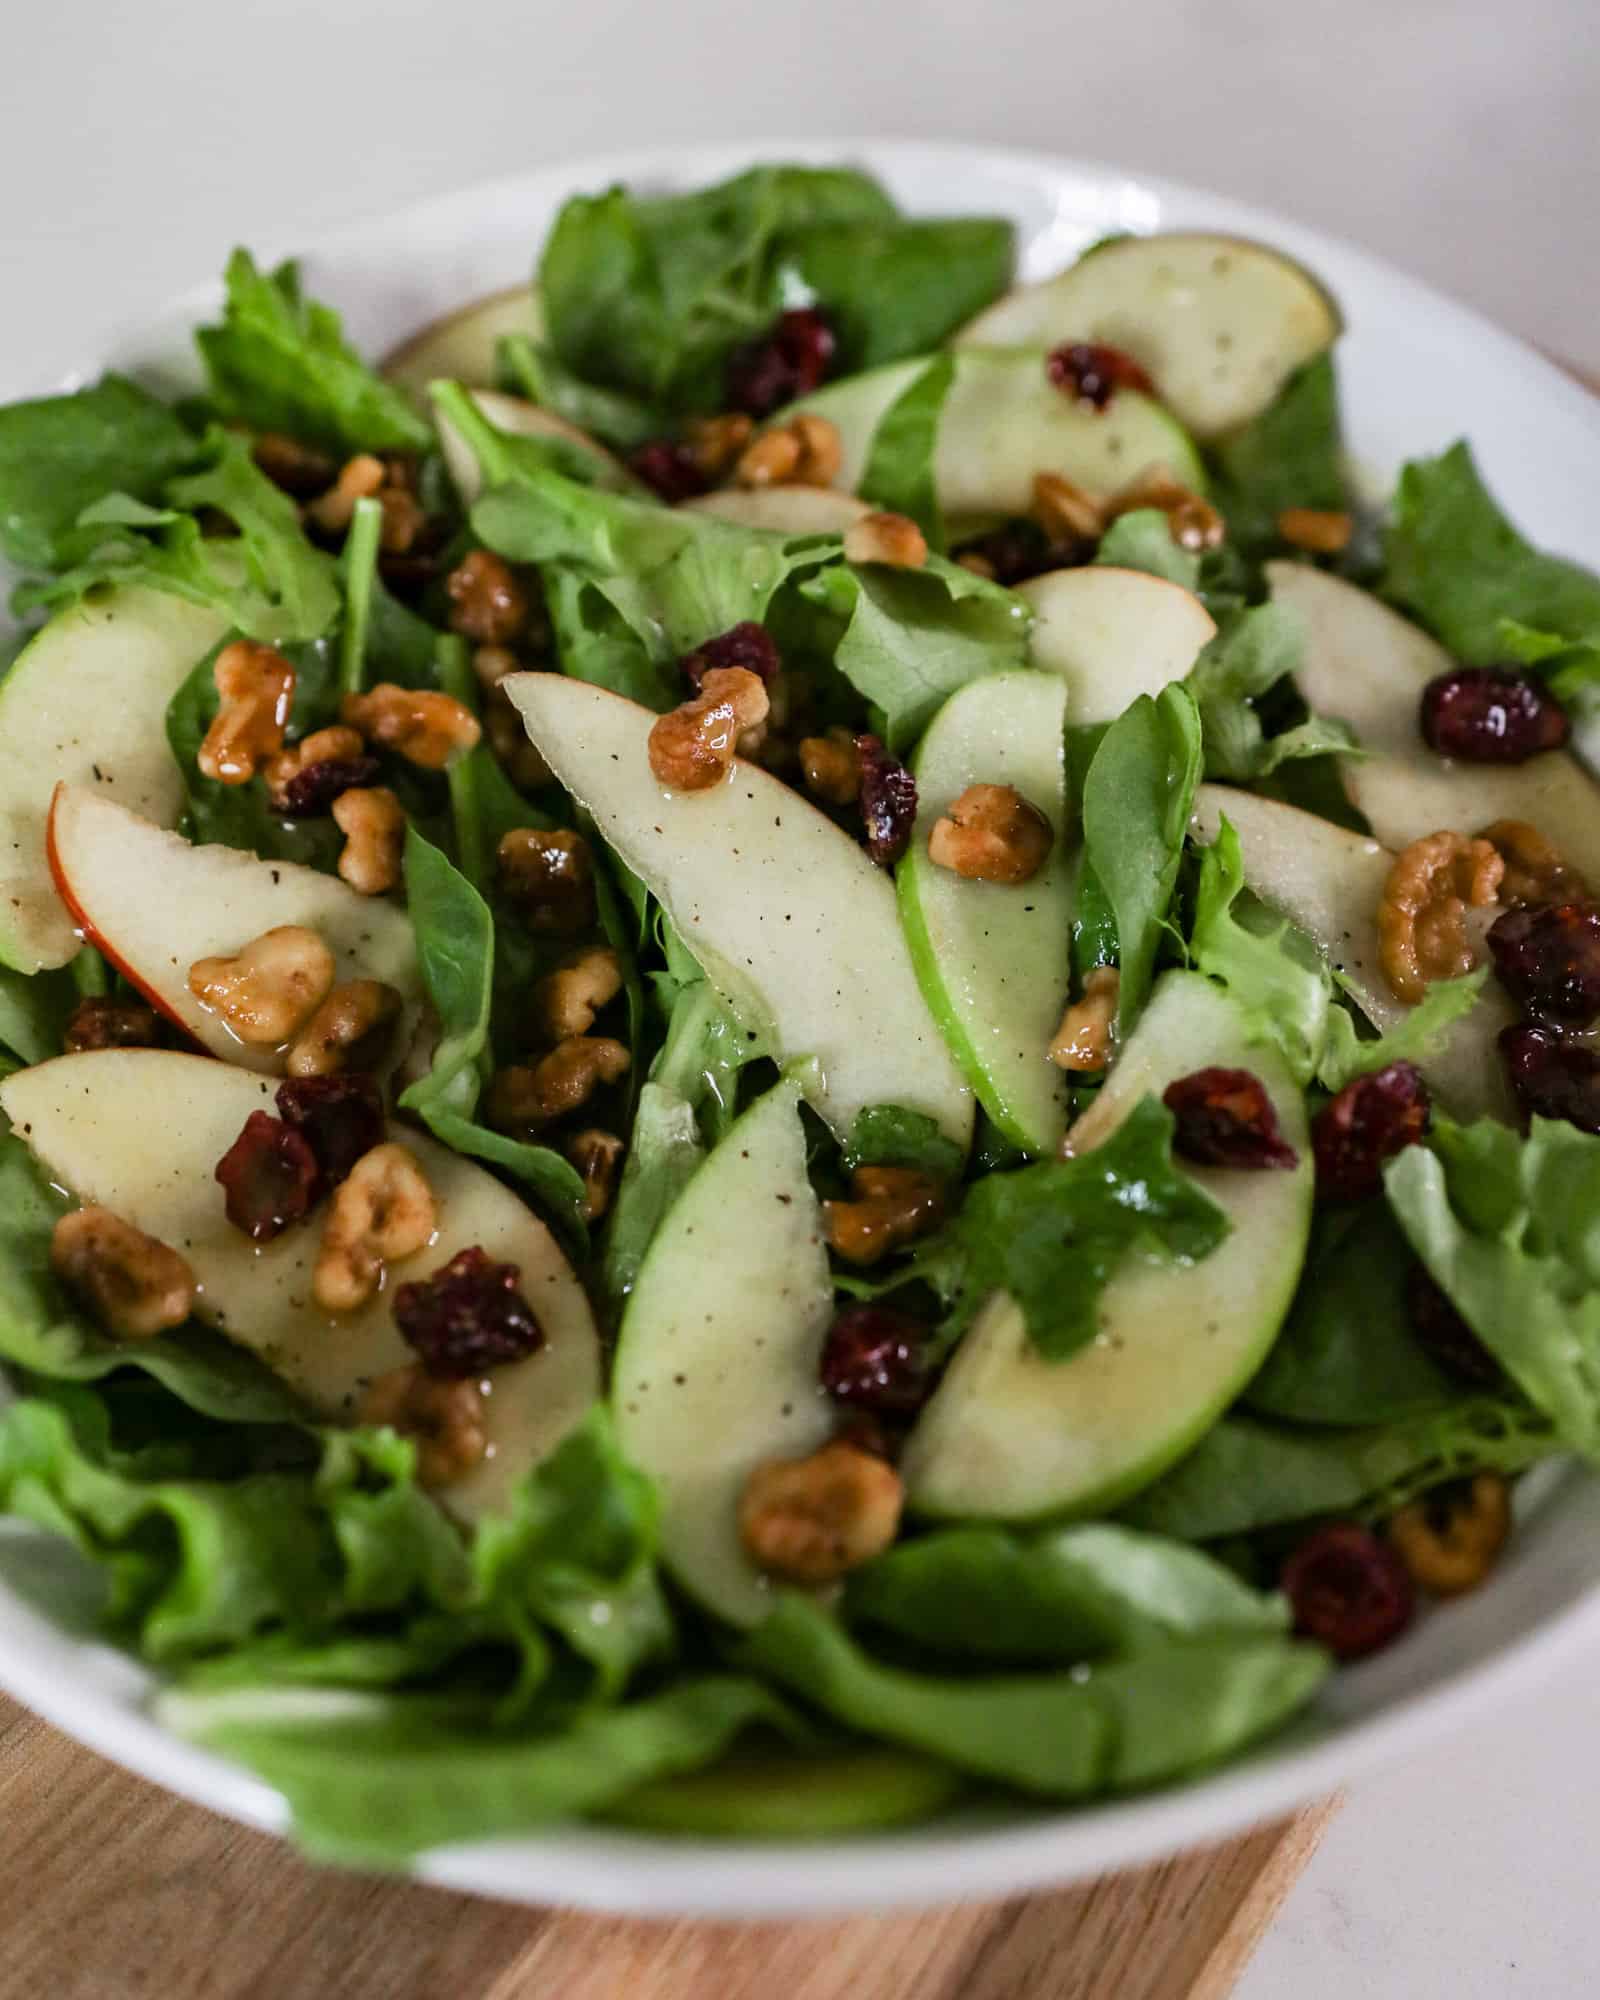 Apple fall salad with apples, cranberries, walnuts